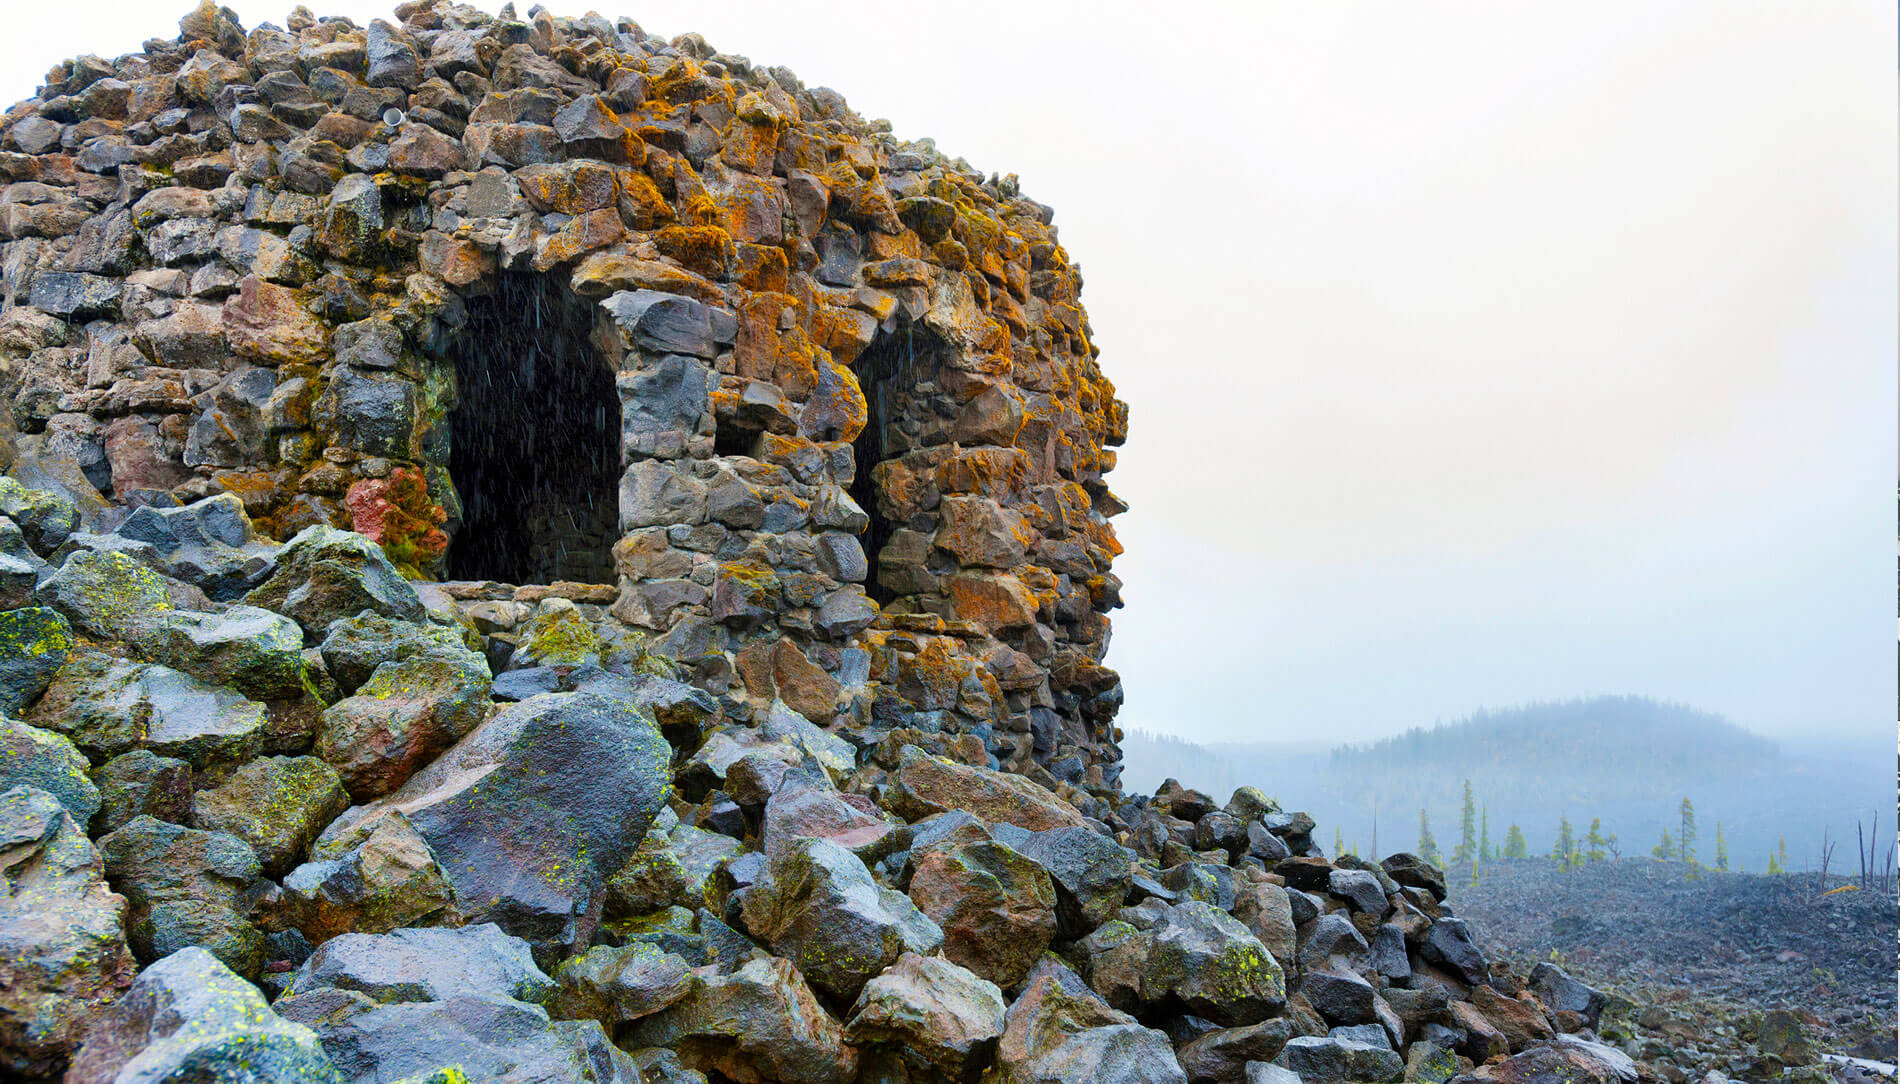 The Dee Wright Observatory on McKenzie Highway is built out of Cascade Range lava rock